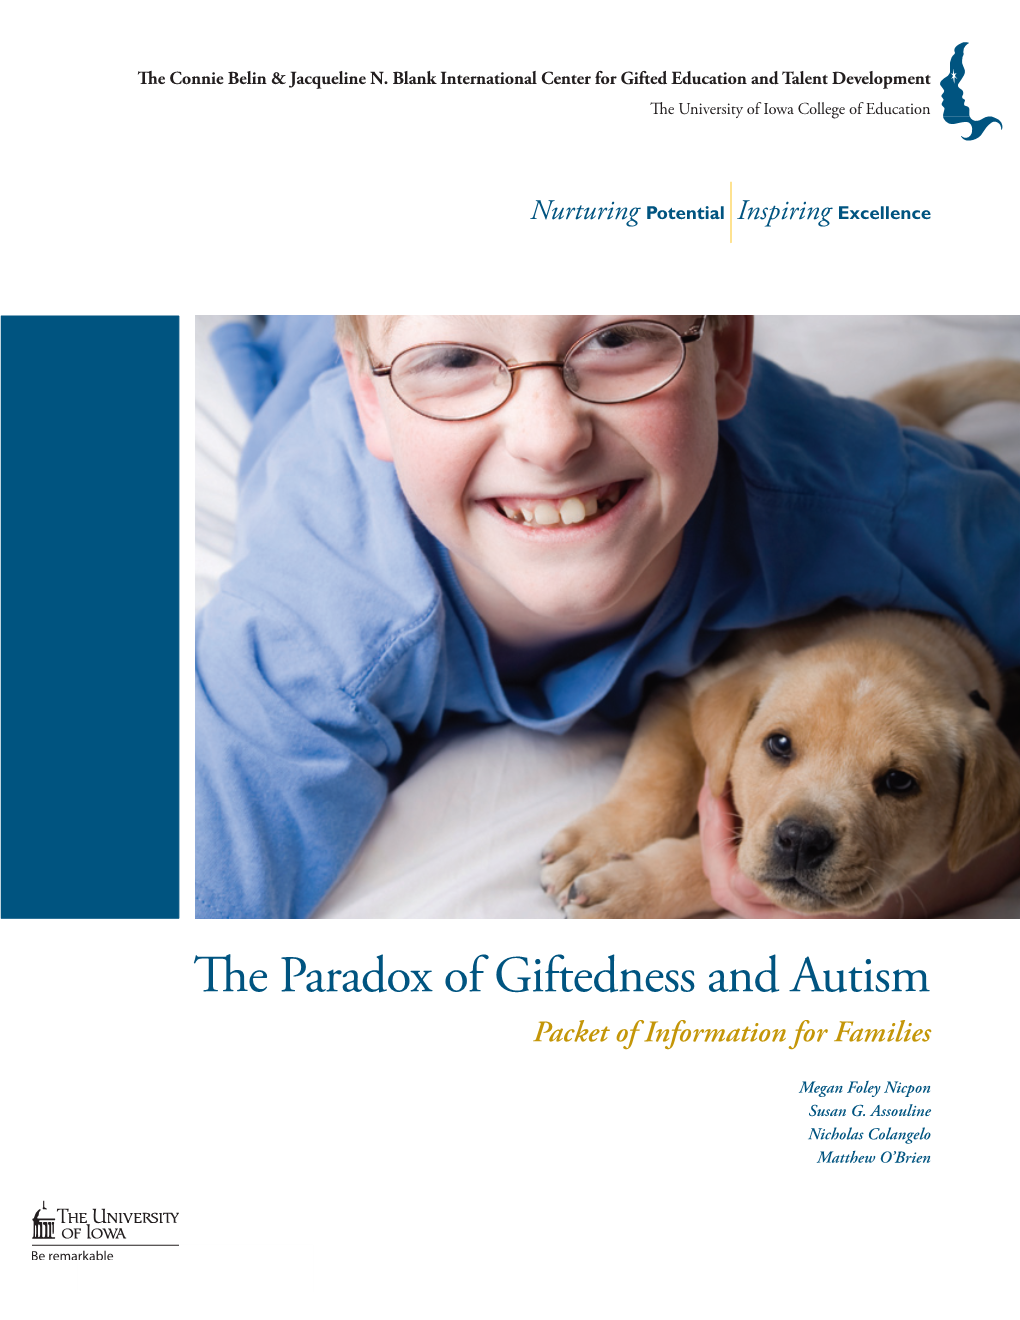 The Paradox of Giftedness and Autism Packet of Information for Families